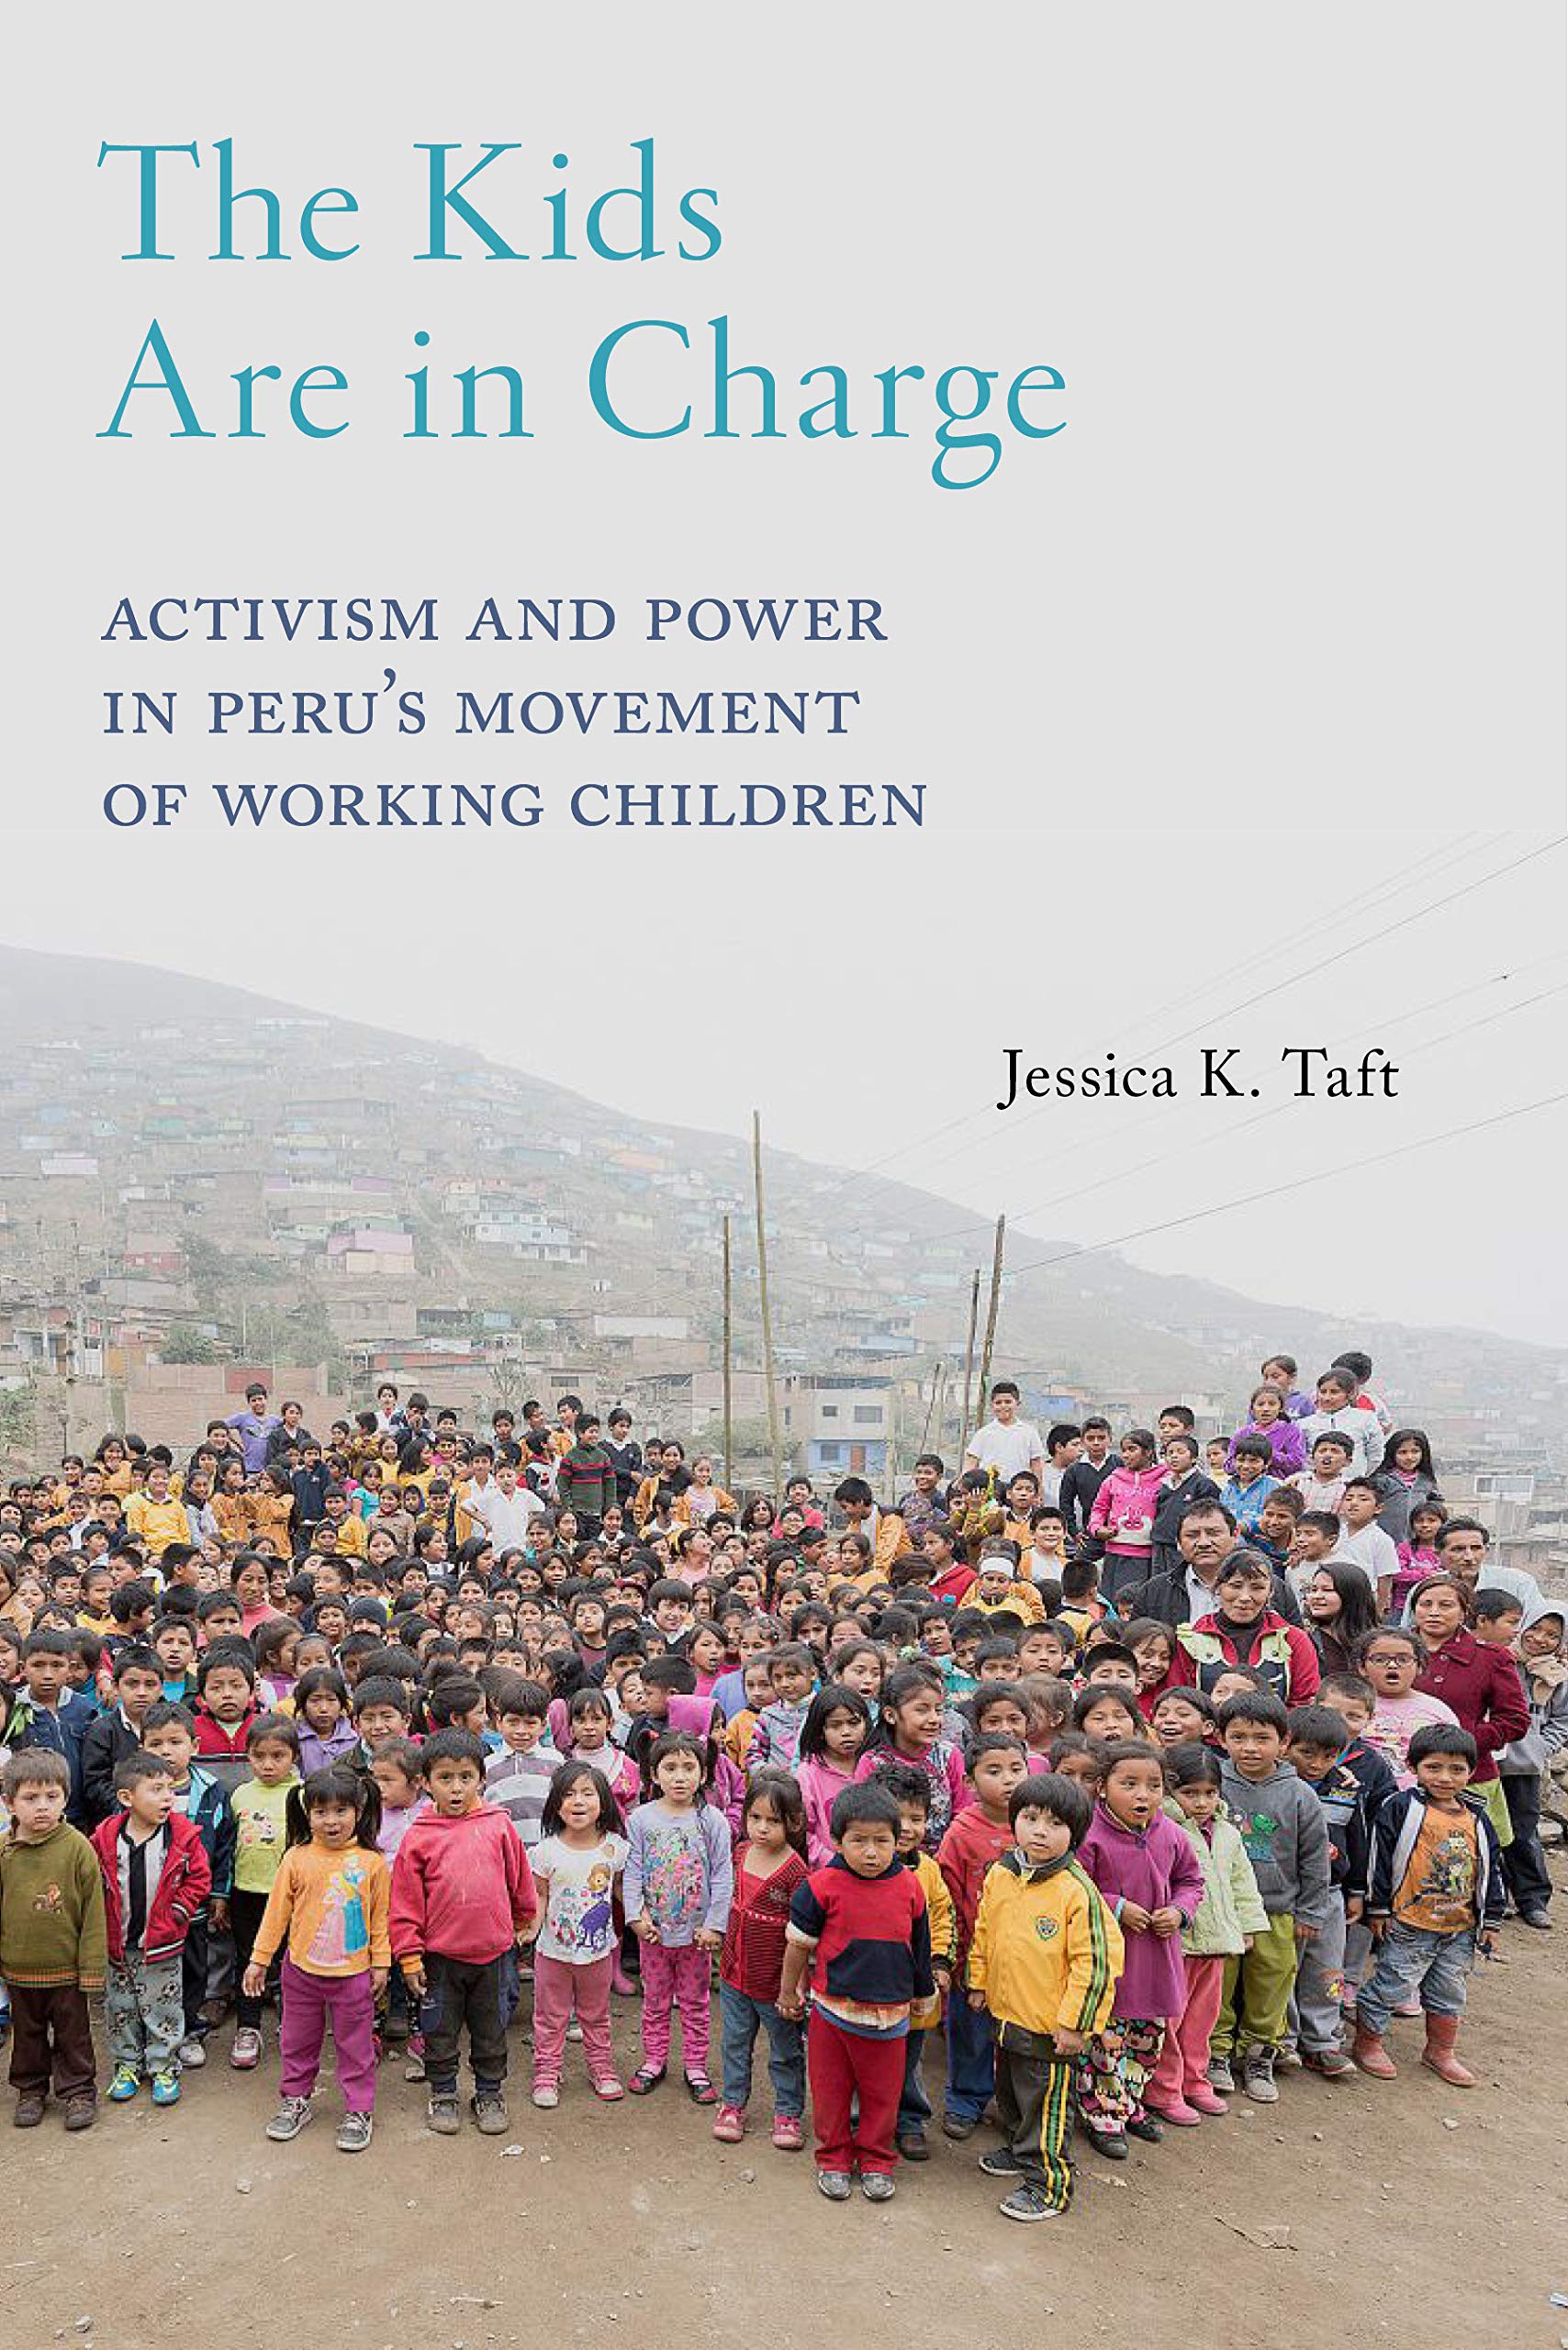 The Kids Are in Charge: Activism and Power in Peru’s Movement of Working Children